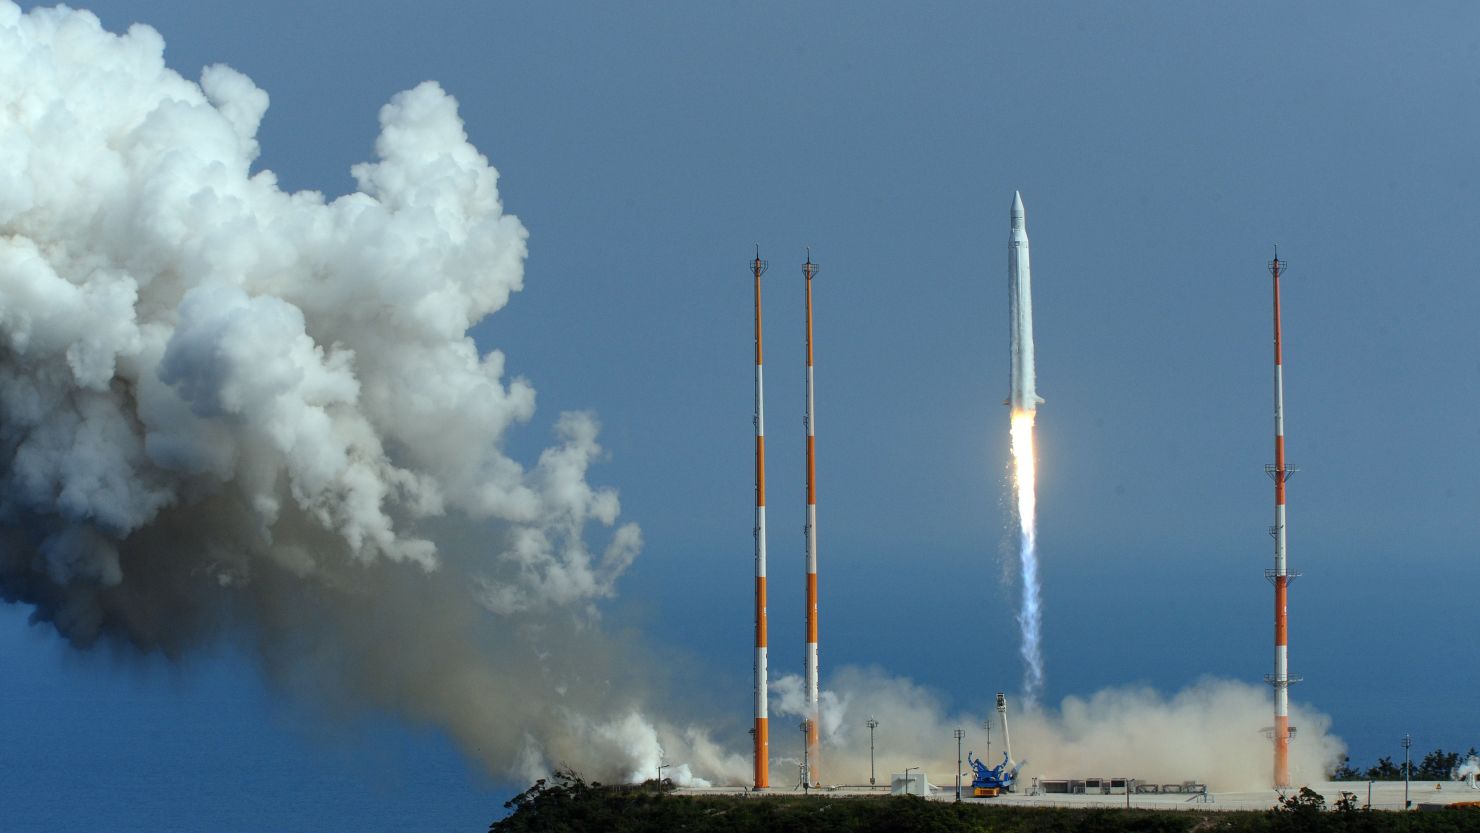 The Naro-1 blasts off on June 10, 2010, in a second failed attempt by South Korea to put a satellite in space.